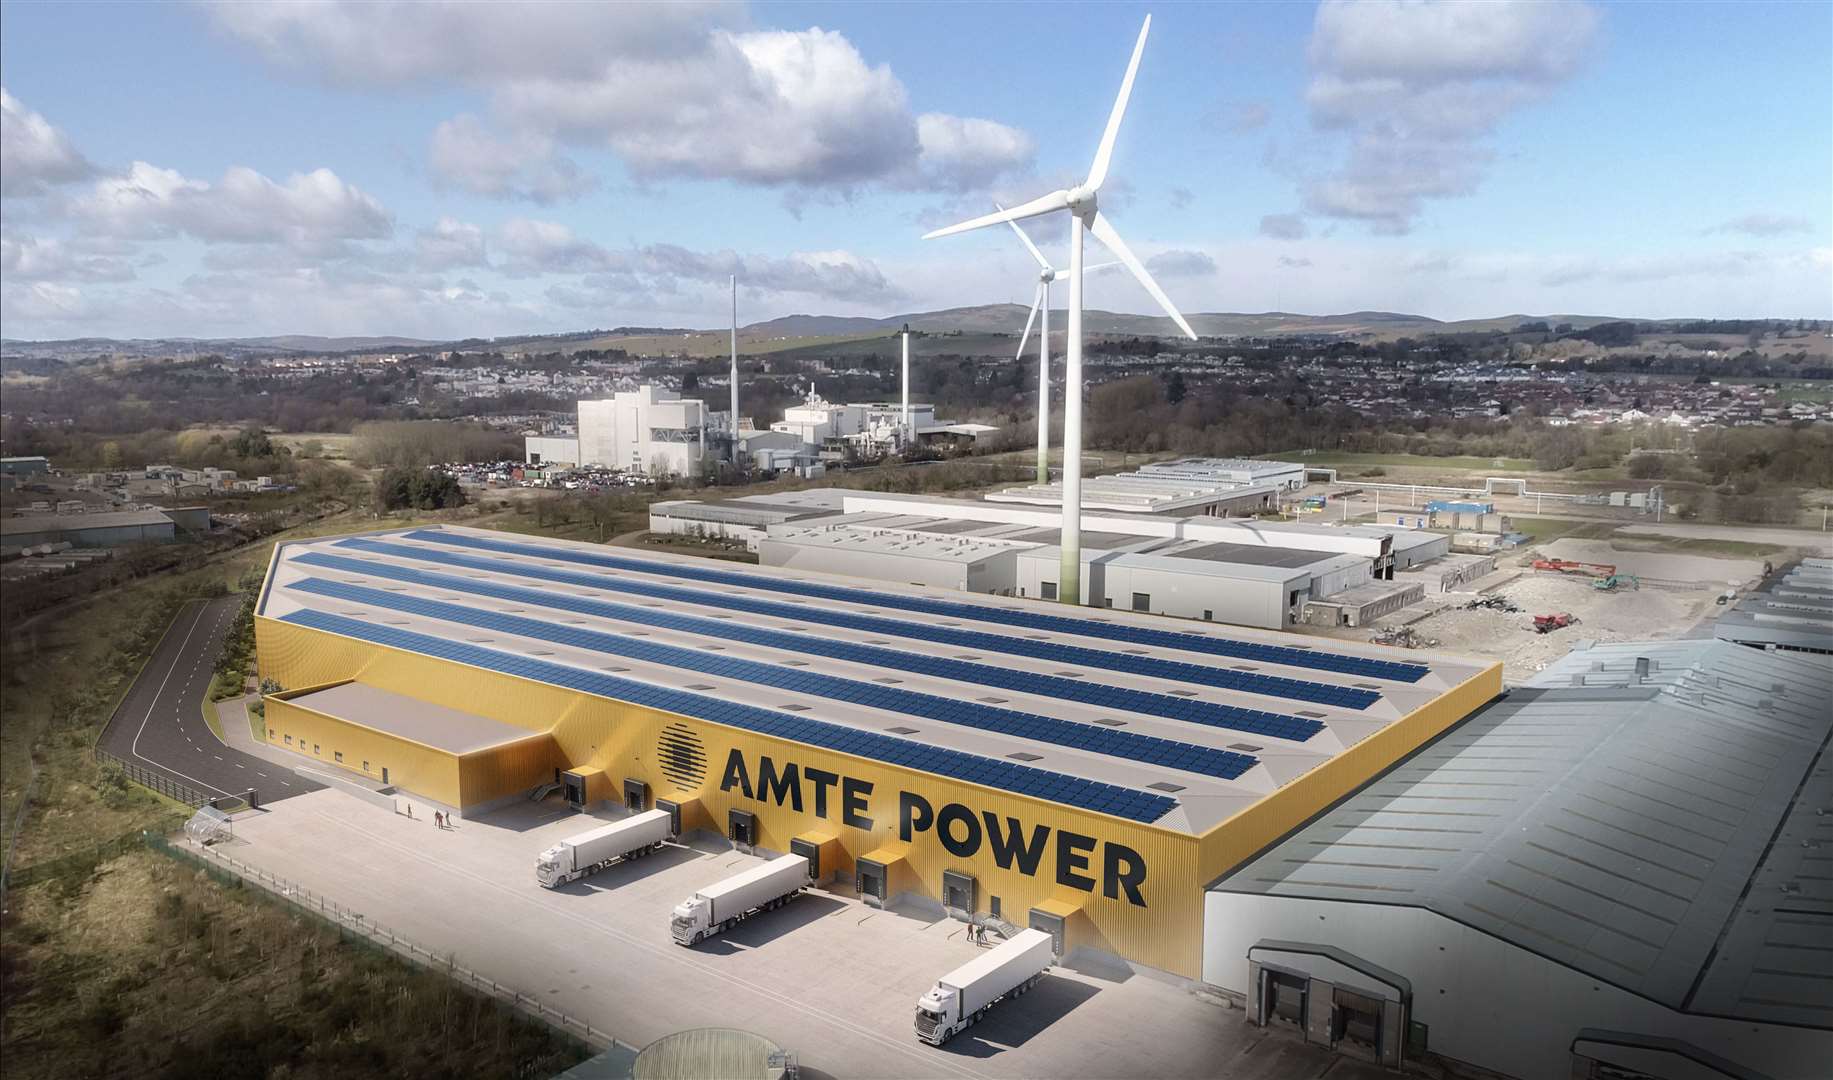 The company's megafactory will be built in Dundee